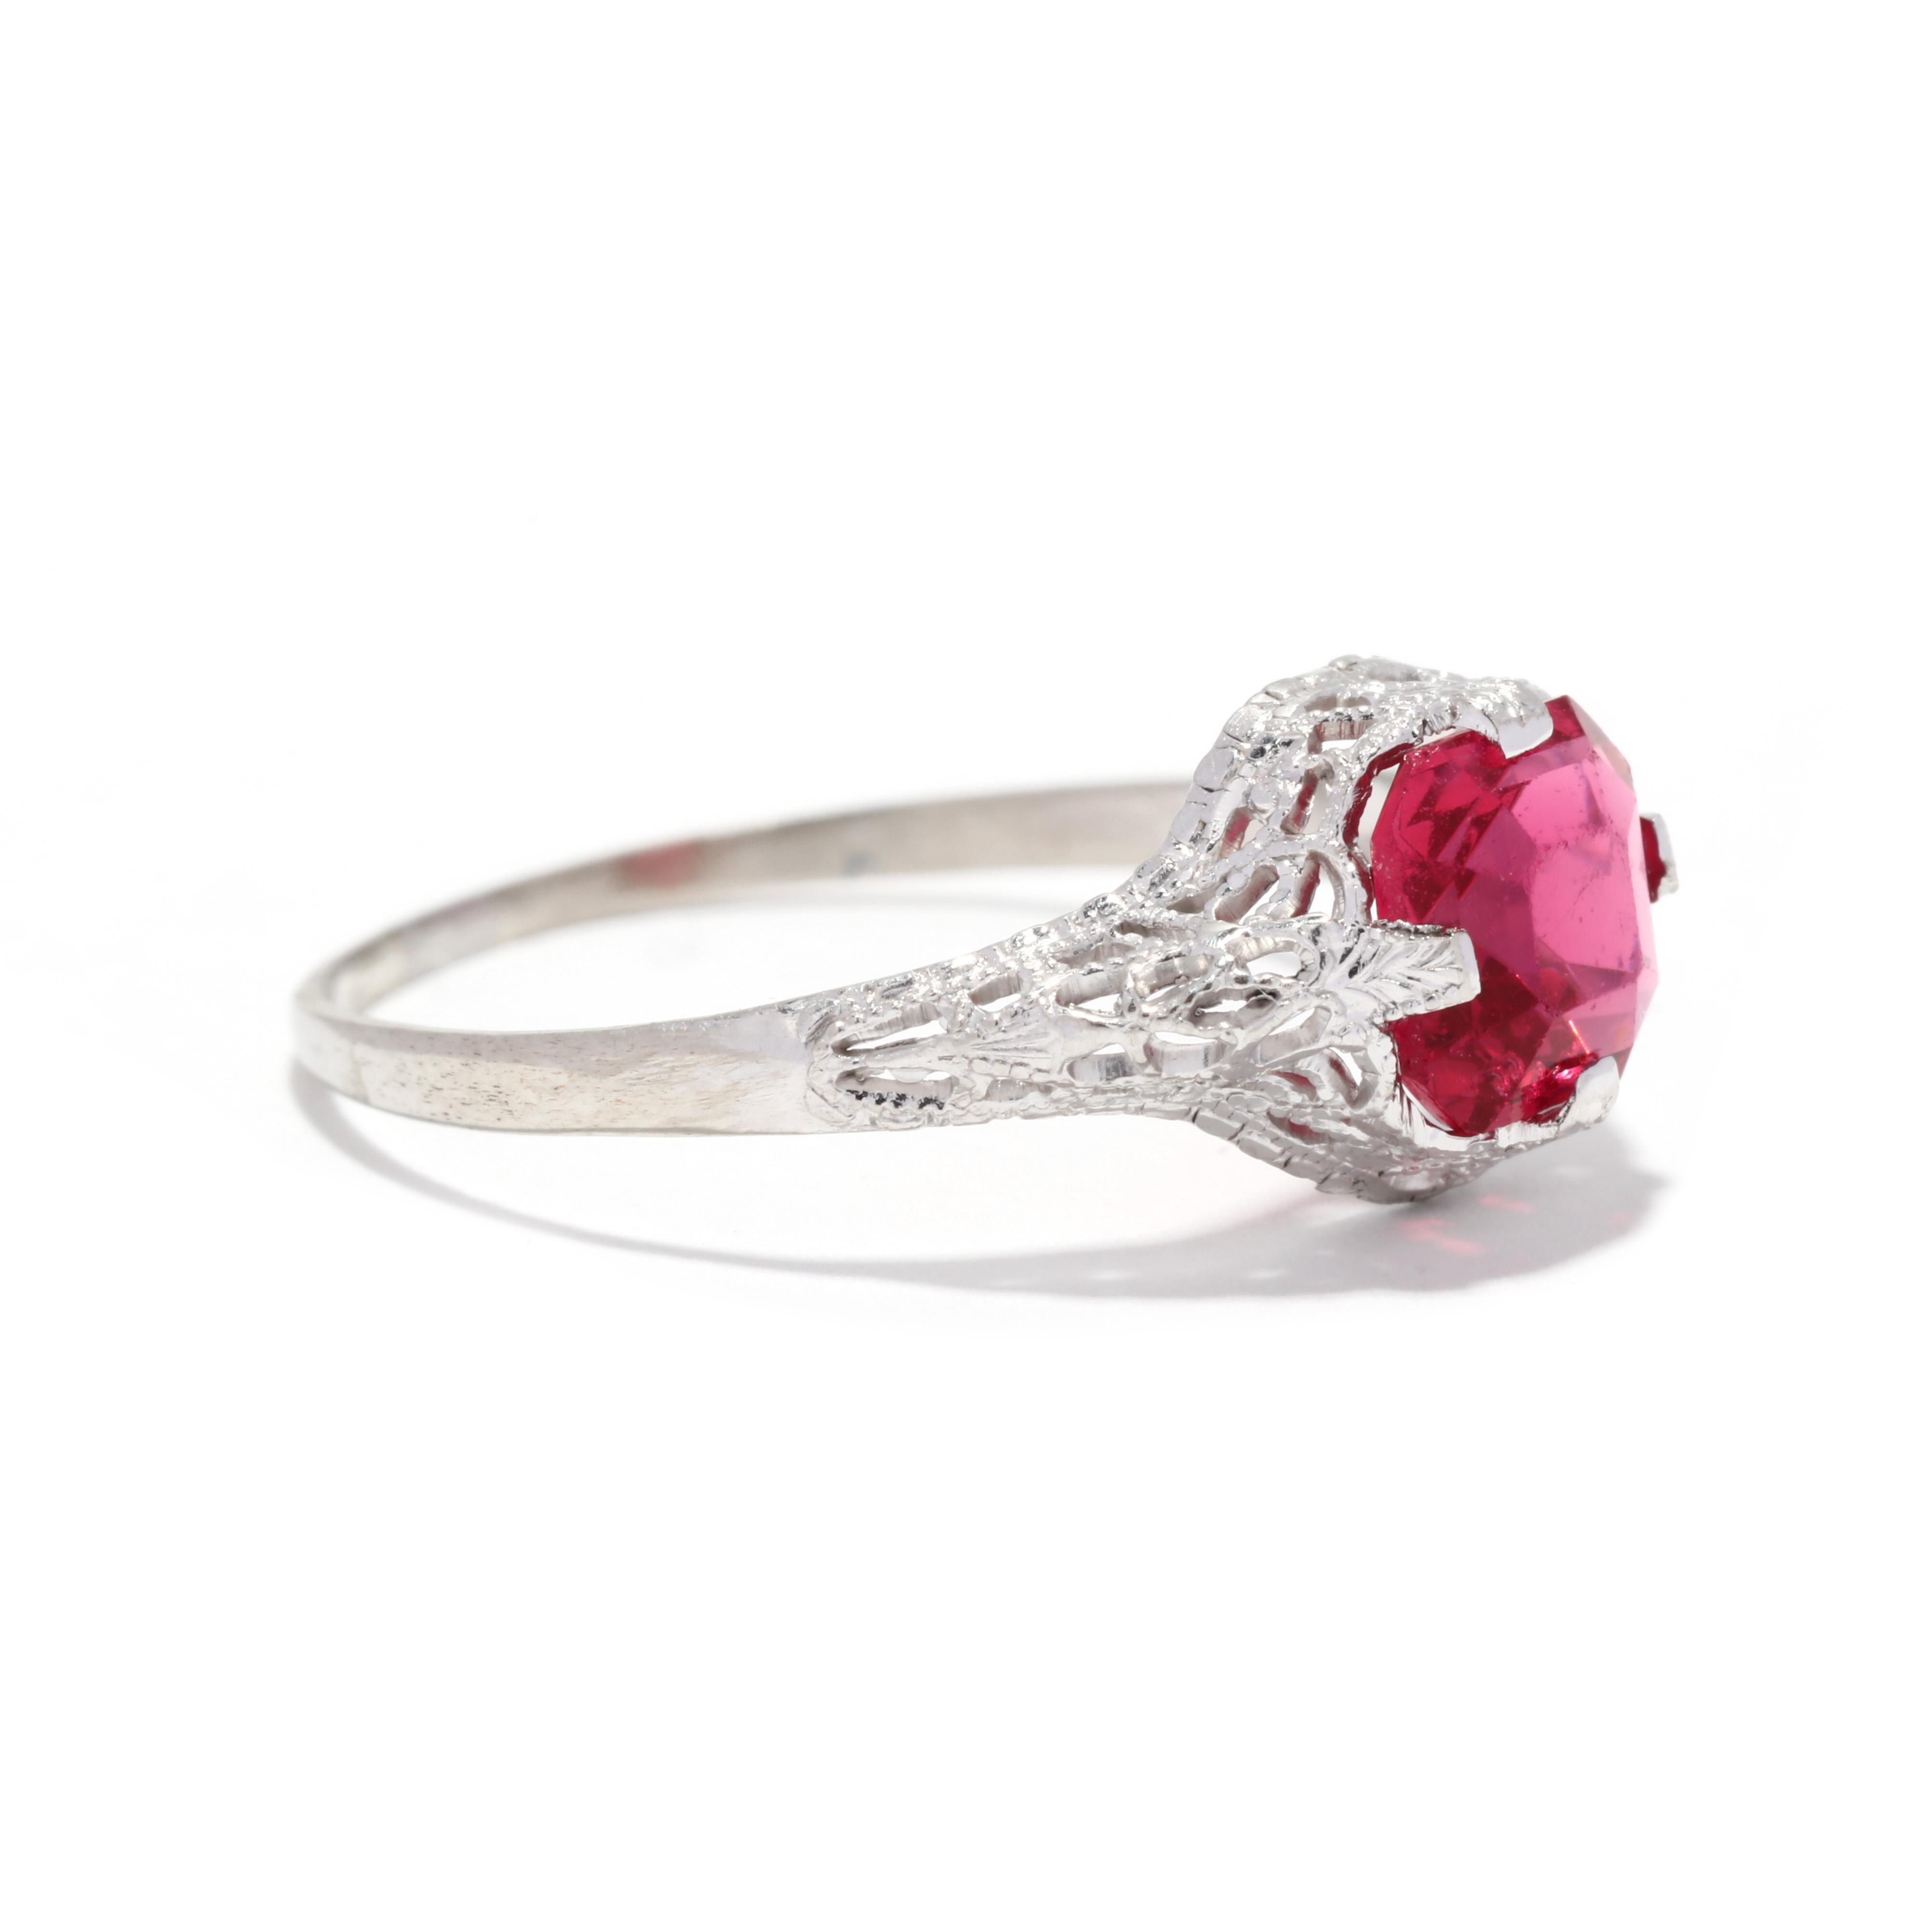 A vintage 10 karat white gold created ruby filigree ring. This ring features an asscher cut created ruby weighing approximately 1.15 carats, prong set in a floral filigree ring with milgrain detailing.

Stones:
- created ruby, 1 stone
- asscher